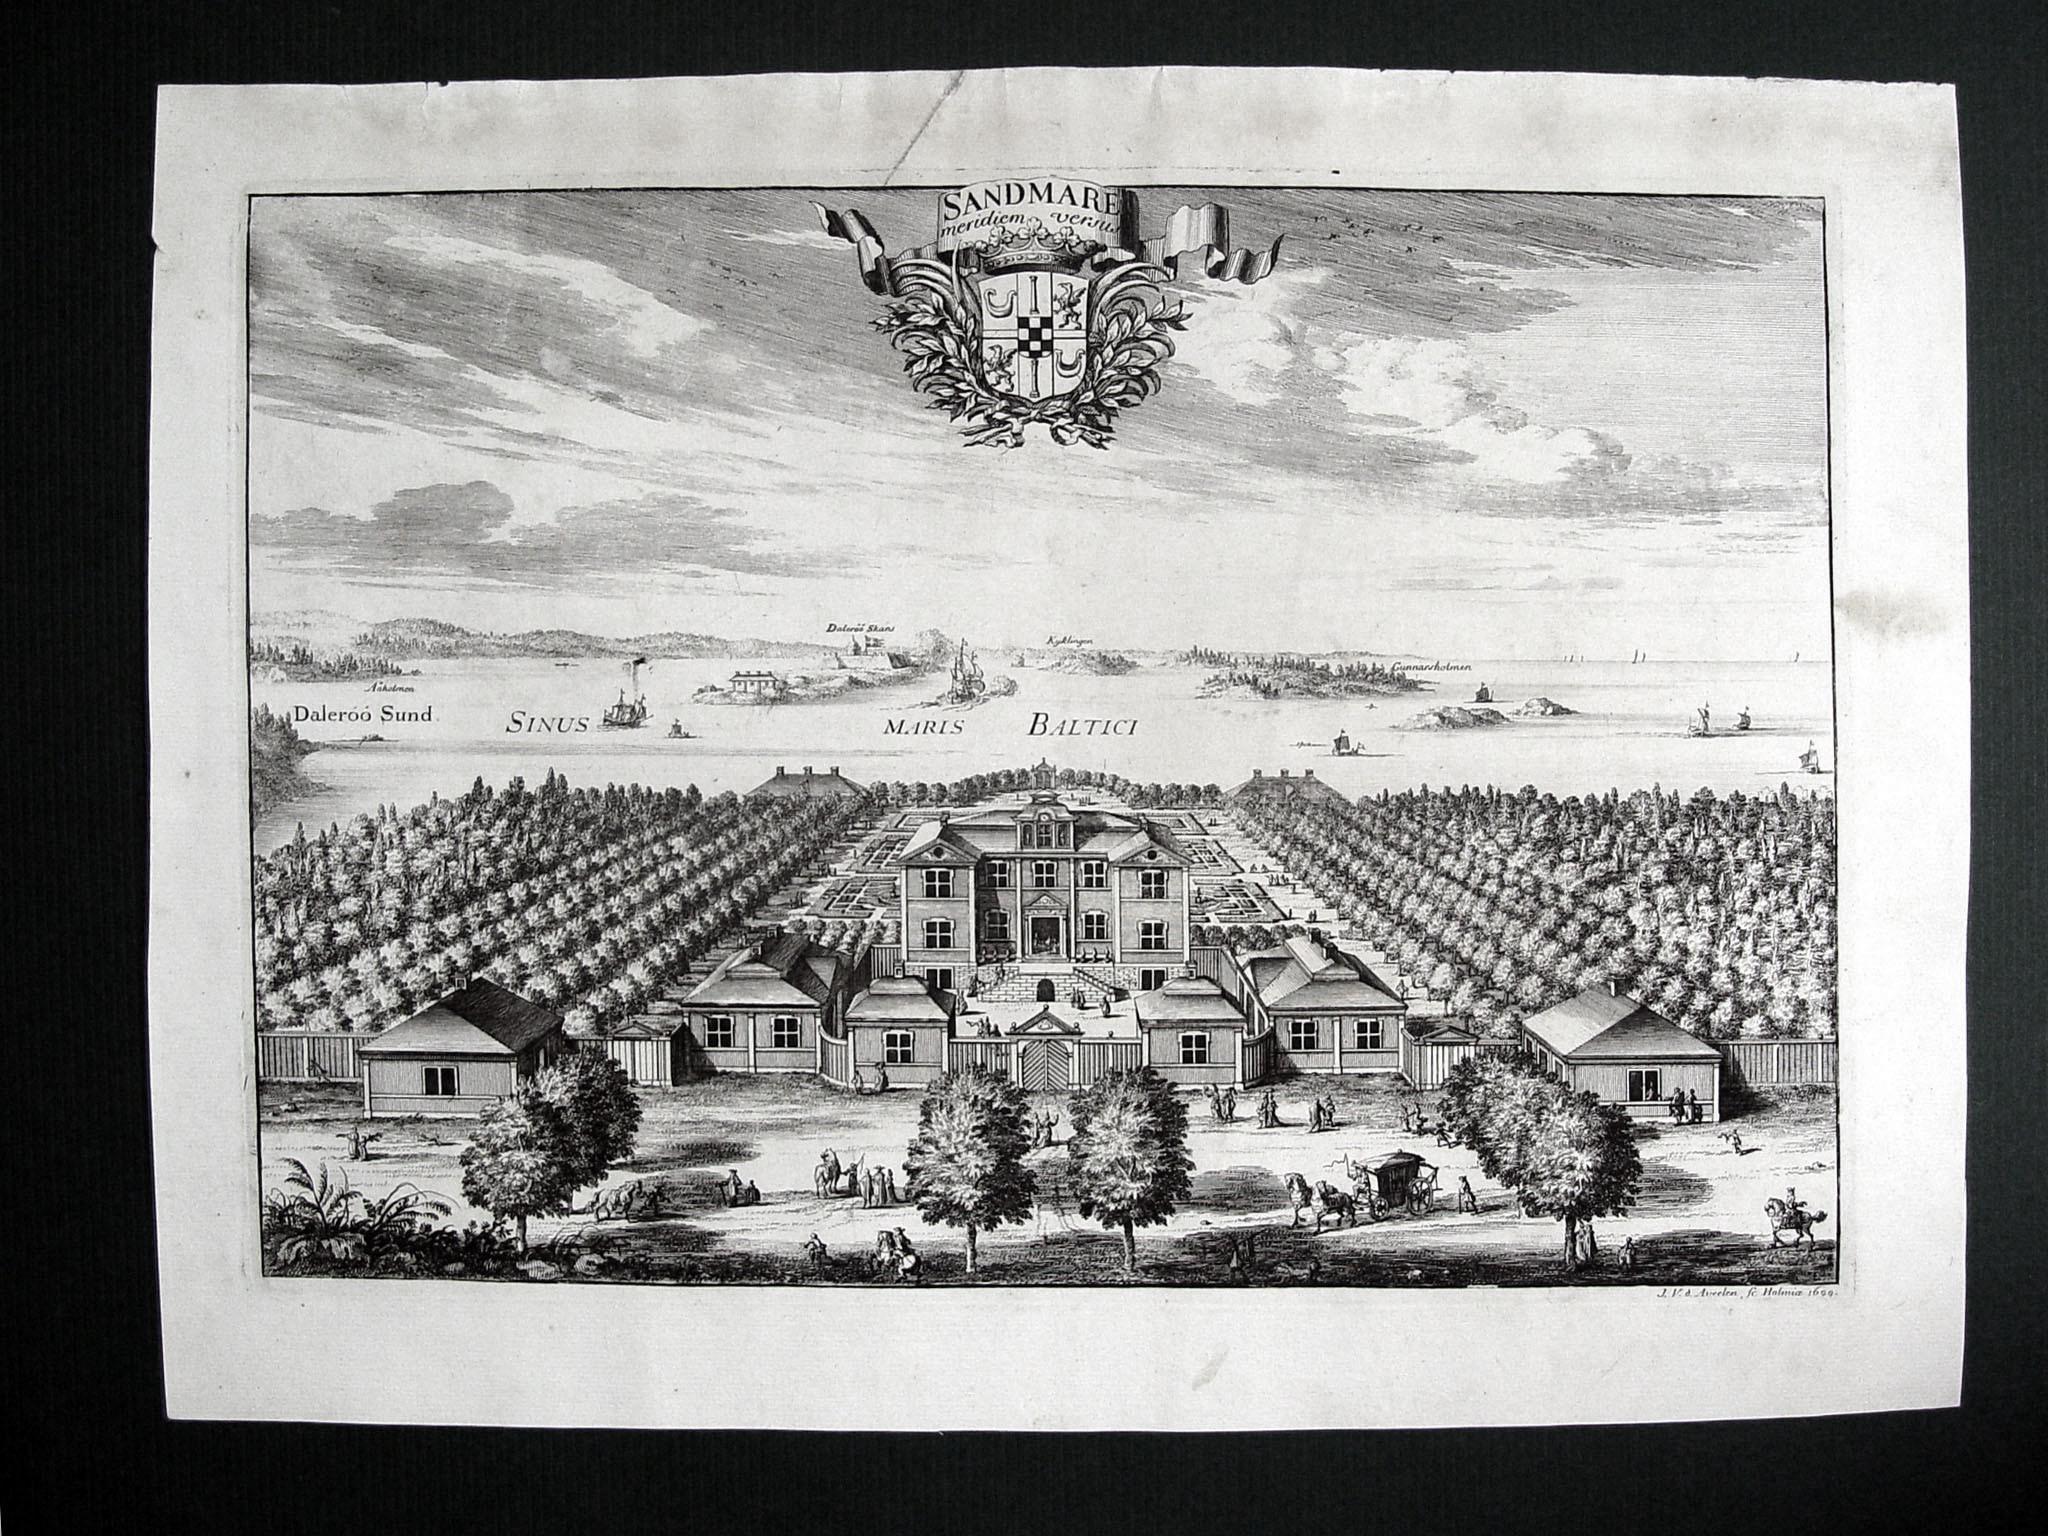 Bird's-eye view engraving of Sandmare Castle and gardens by Johannes van den Aveelen, 1699. Viewed looking toward the Baltic Sea, from a large series of engravings collected by Erik Dahlberg of Swedish estates. Unframed. Age toning, edge wear. We